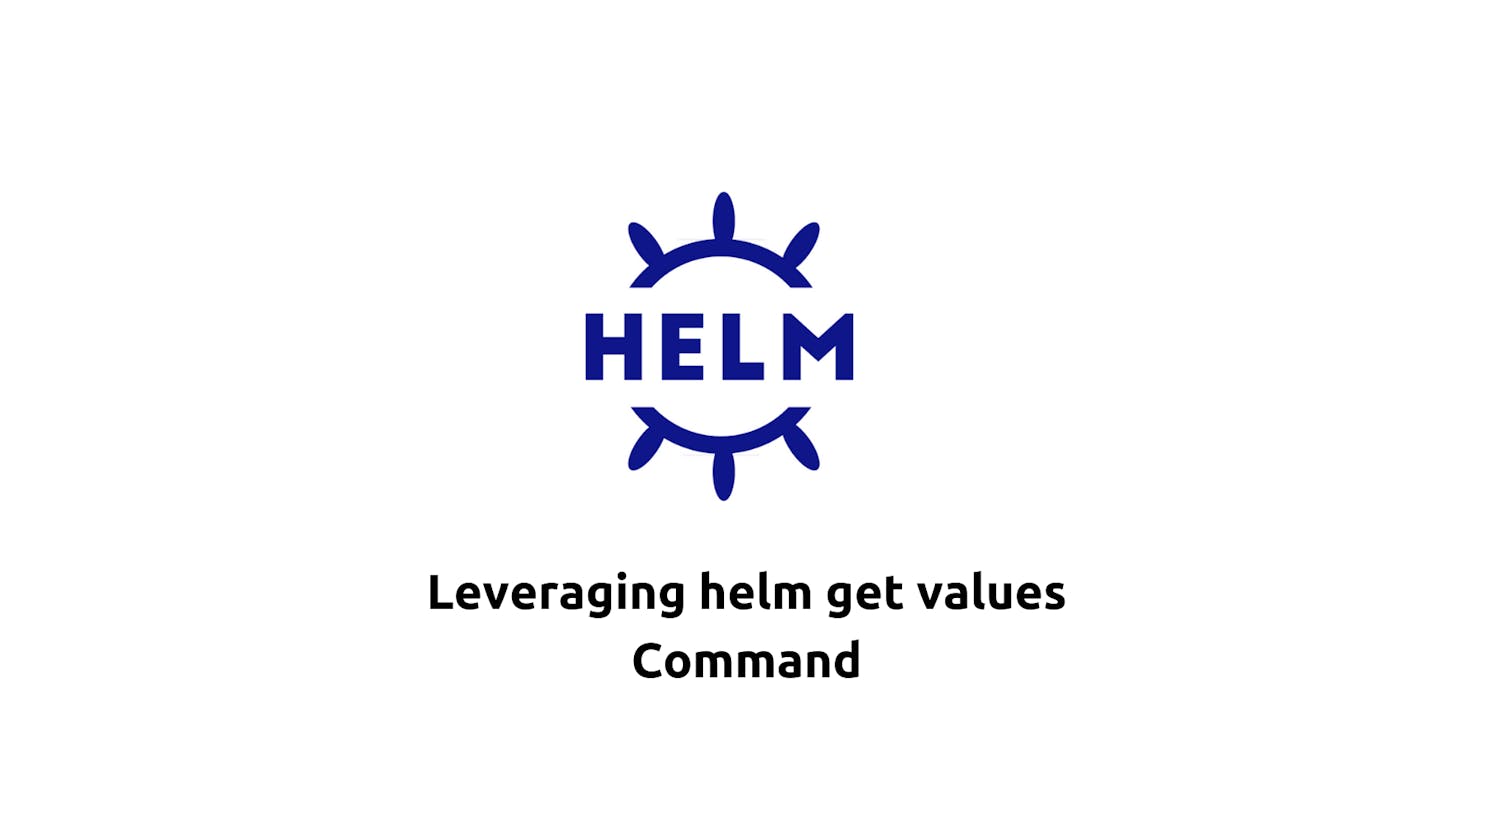 Leveraging helm get values Command